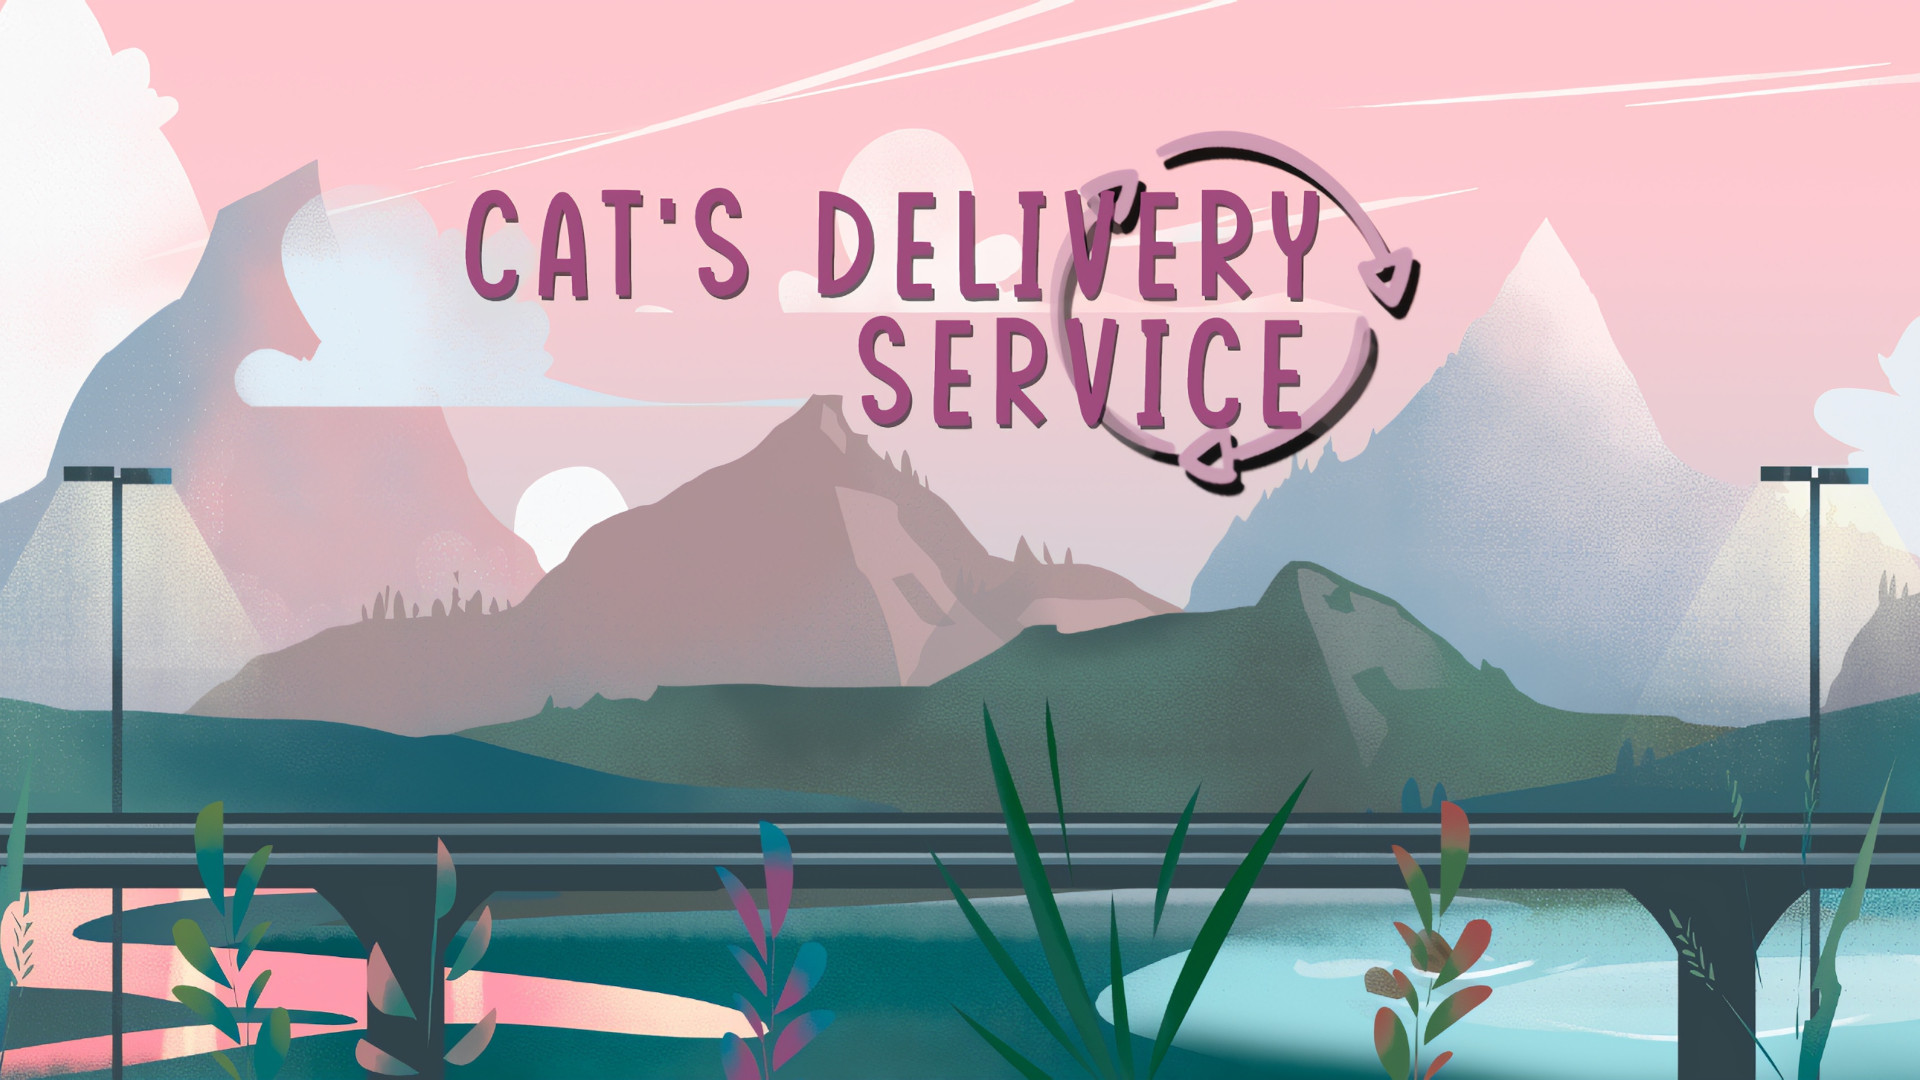 Cat's Delivery Service